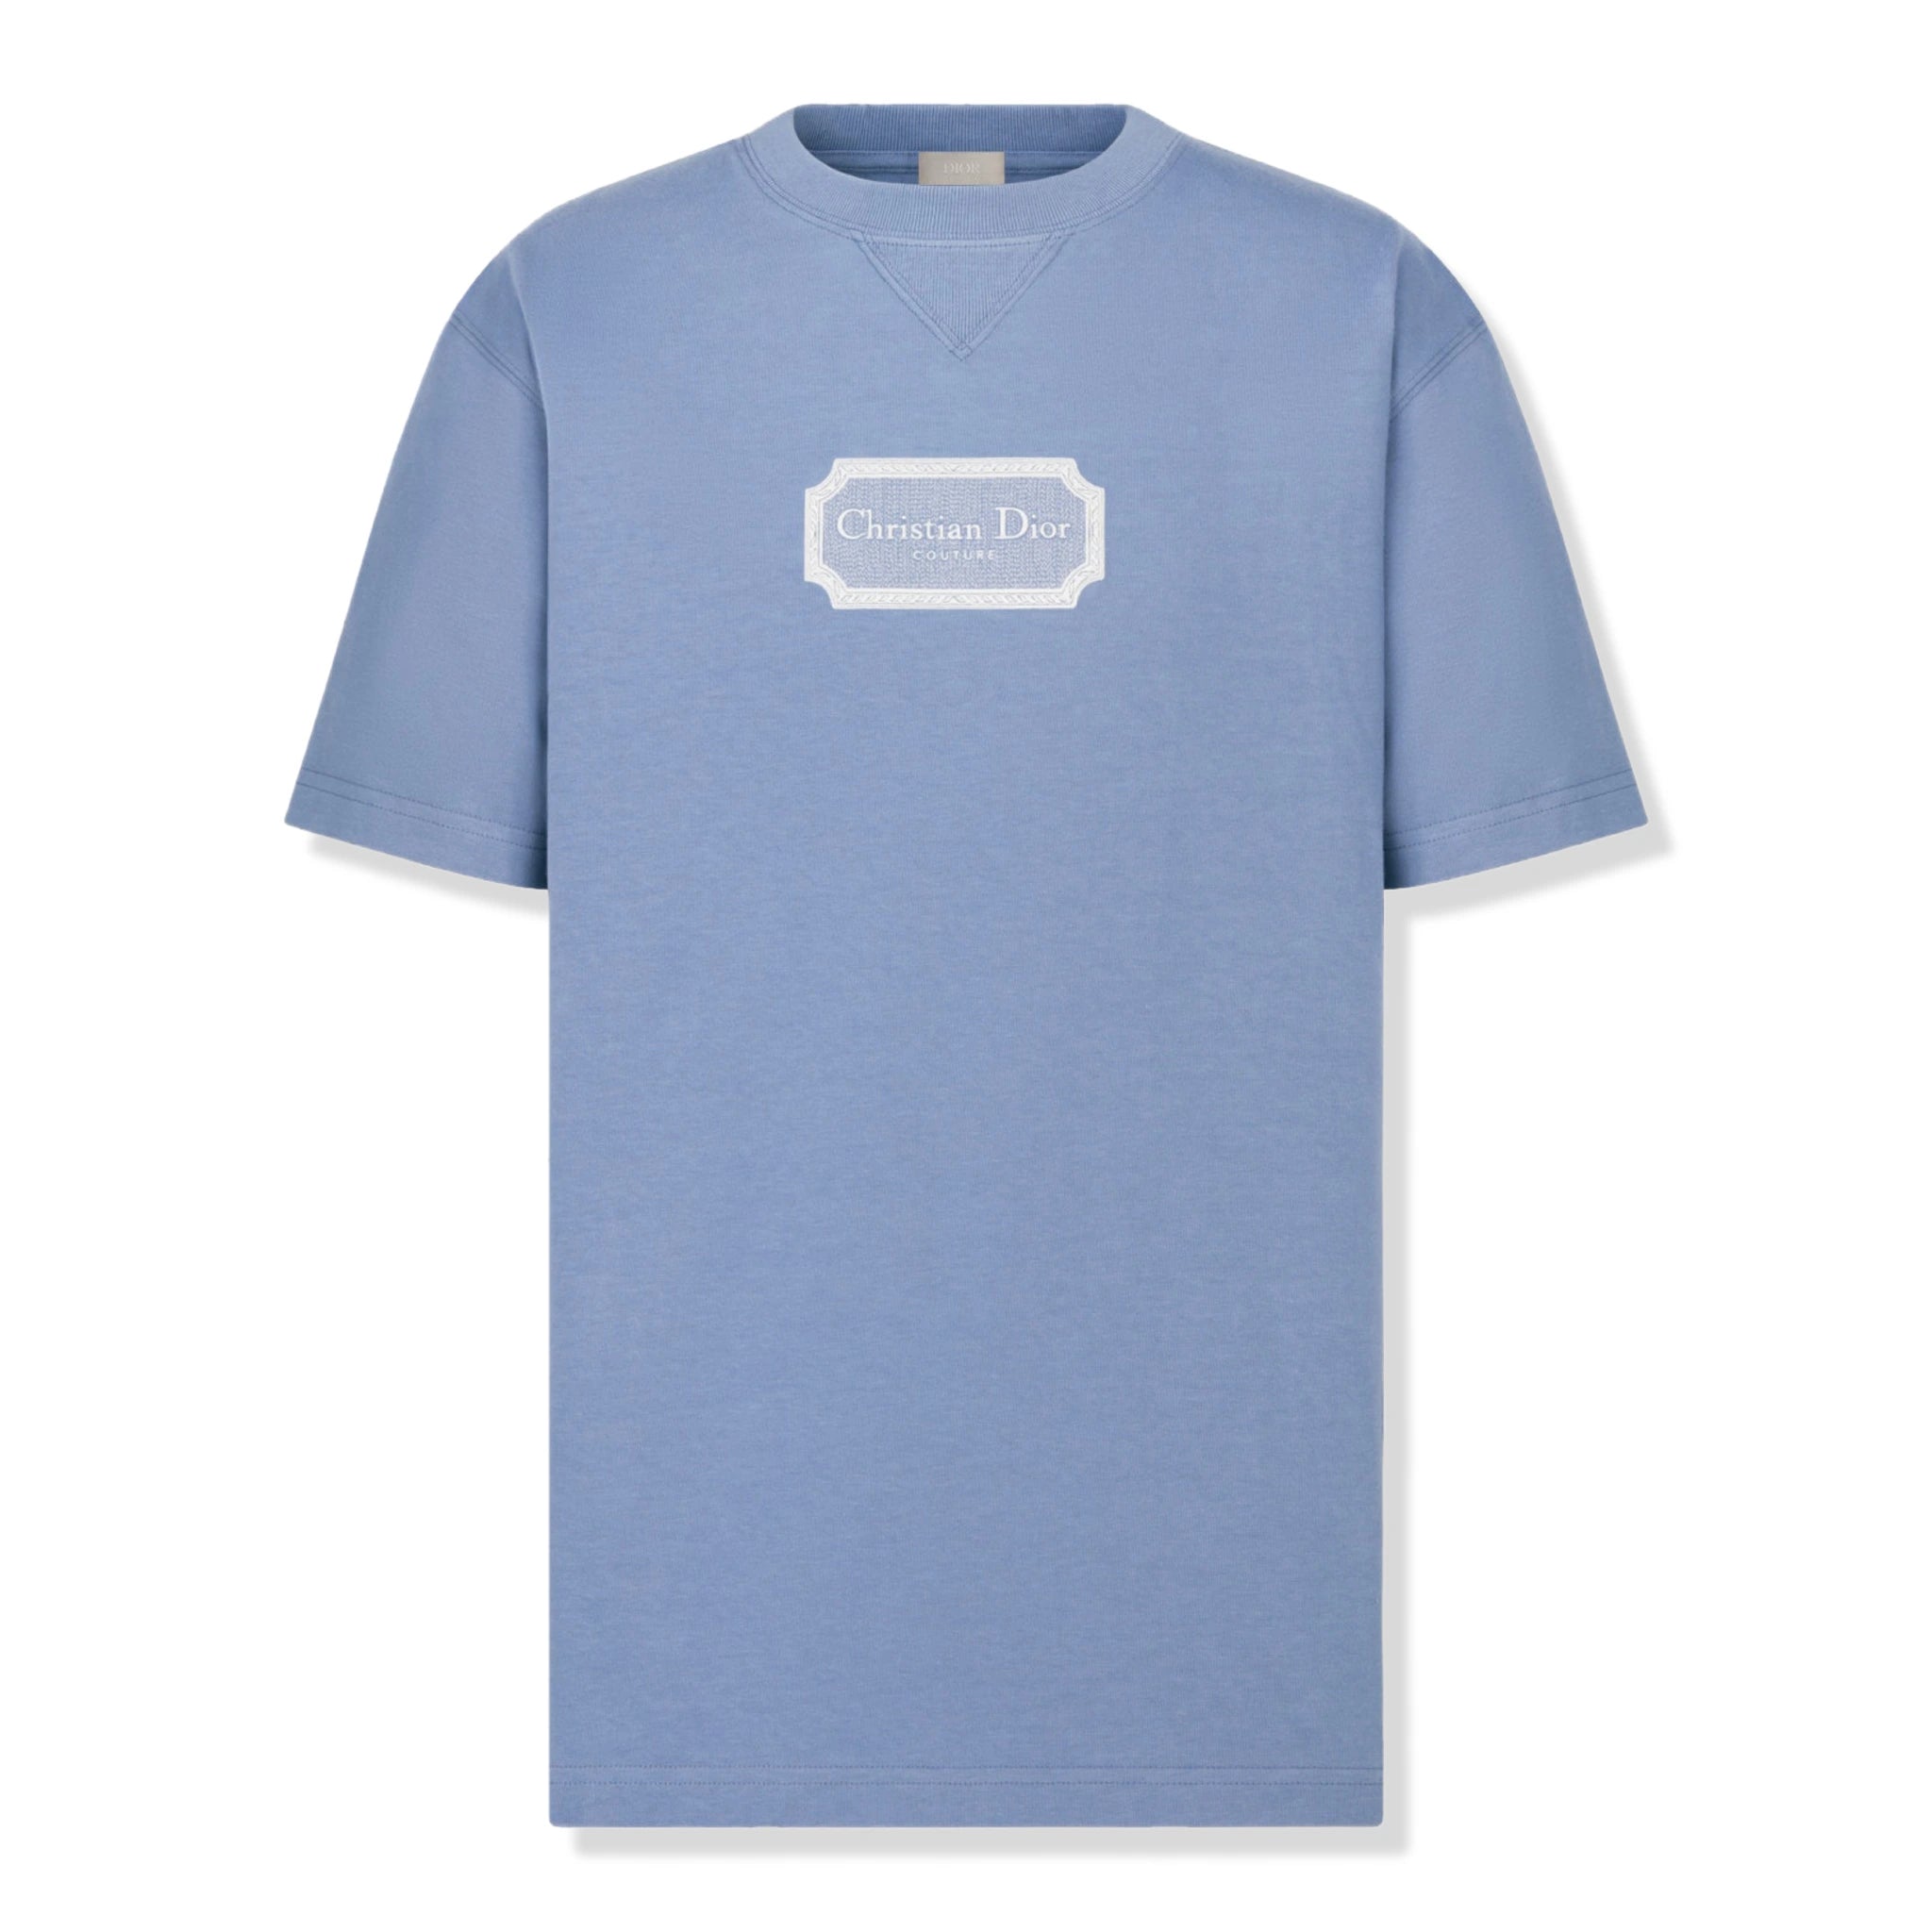 Front view of Dior 'Christian Dior Couture' Relaxed Fit Blue T Shirt 343J696C0554_C580